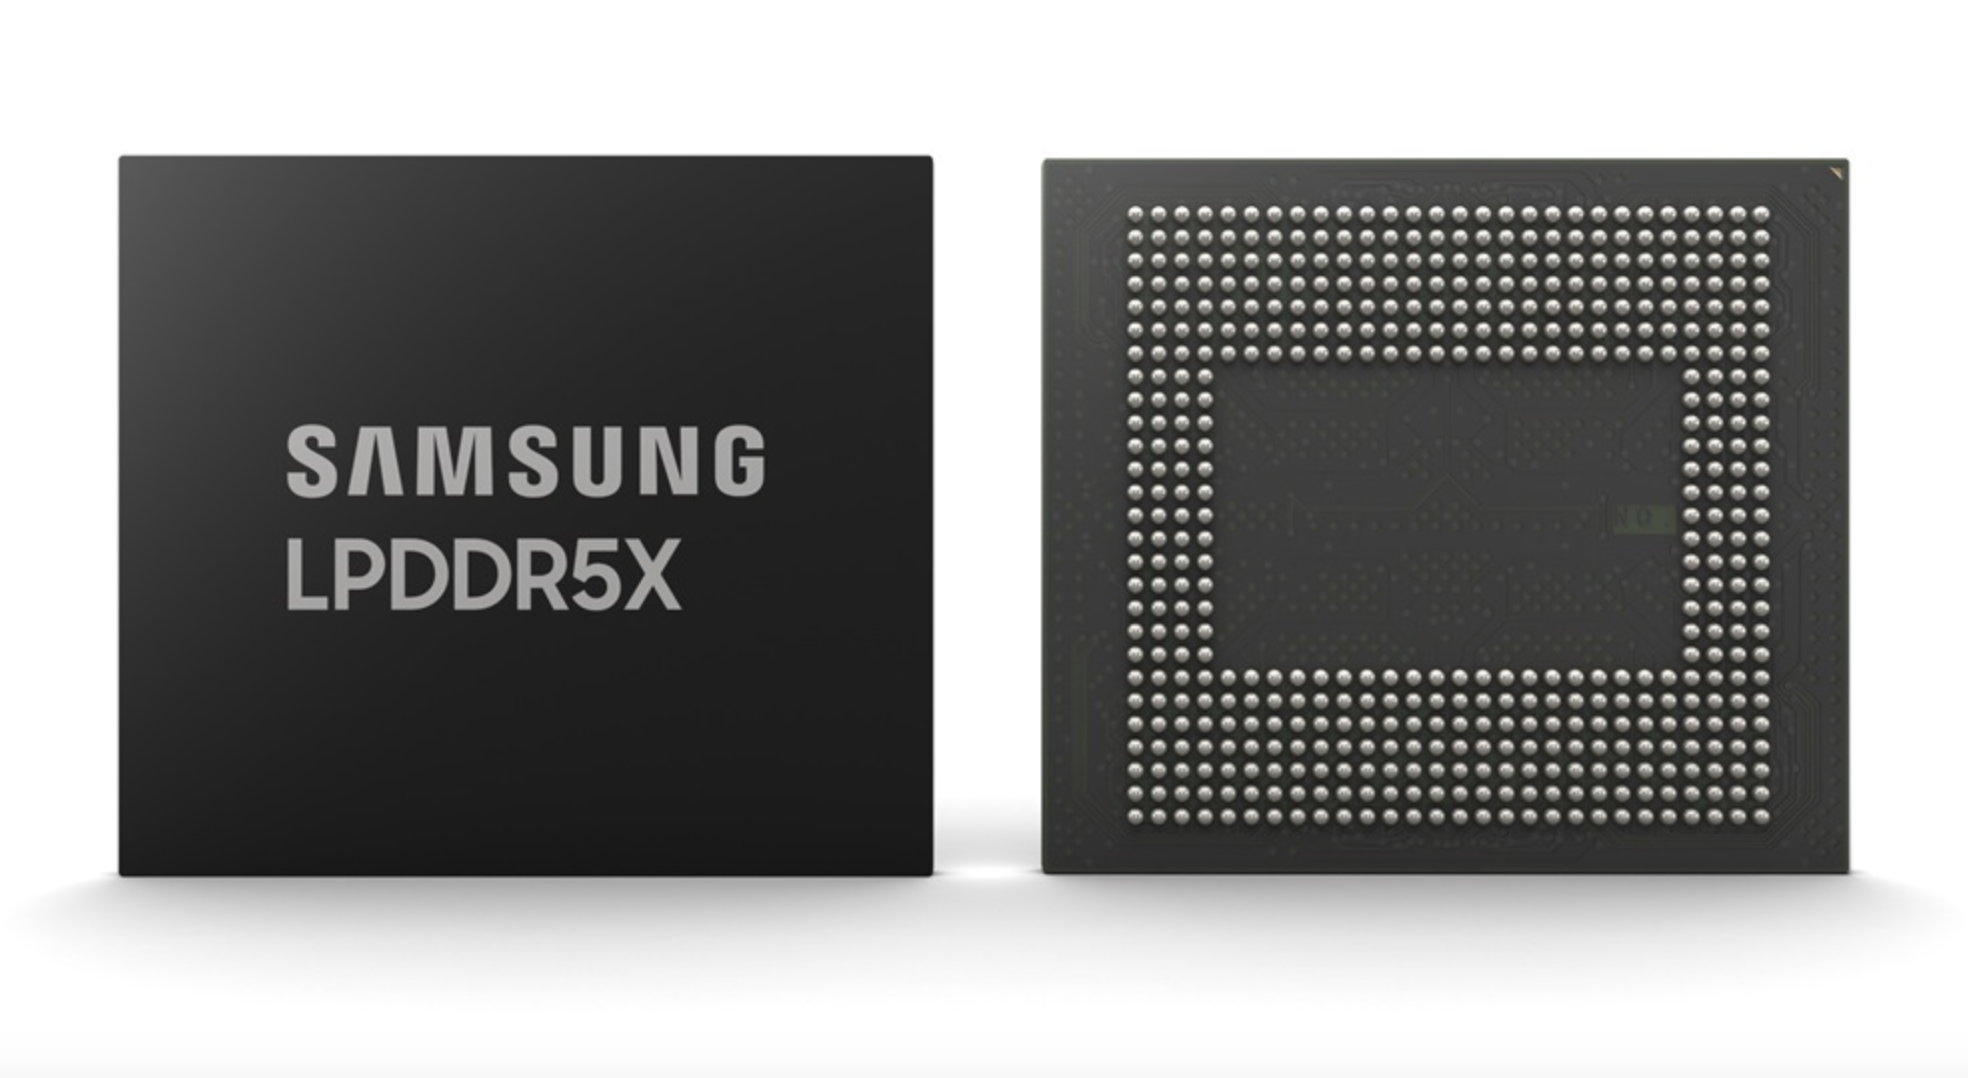 Samsung Says its New LPDDR5X DRAM is the Fastest One Yet